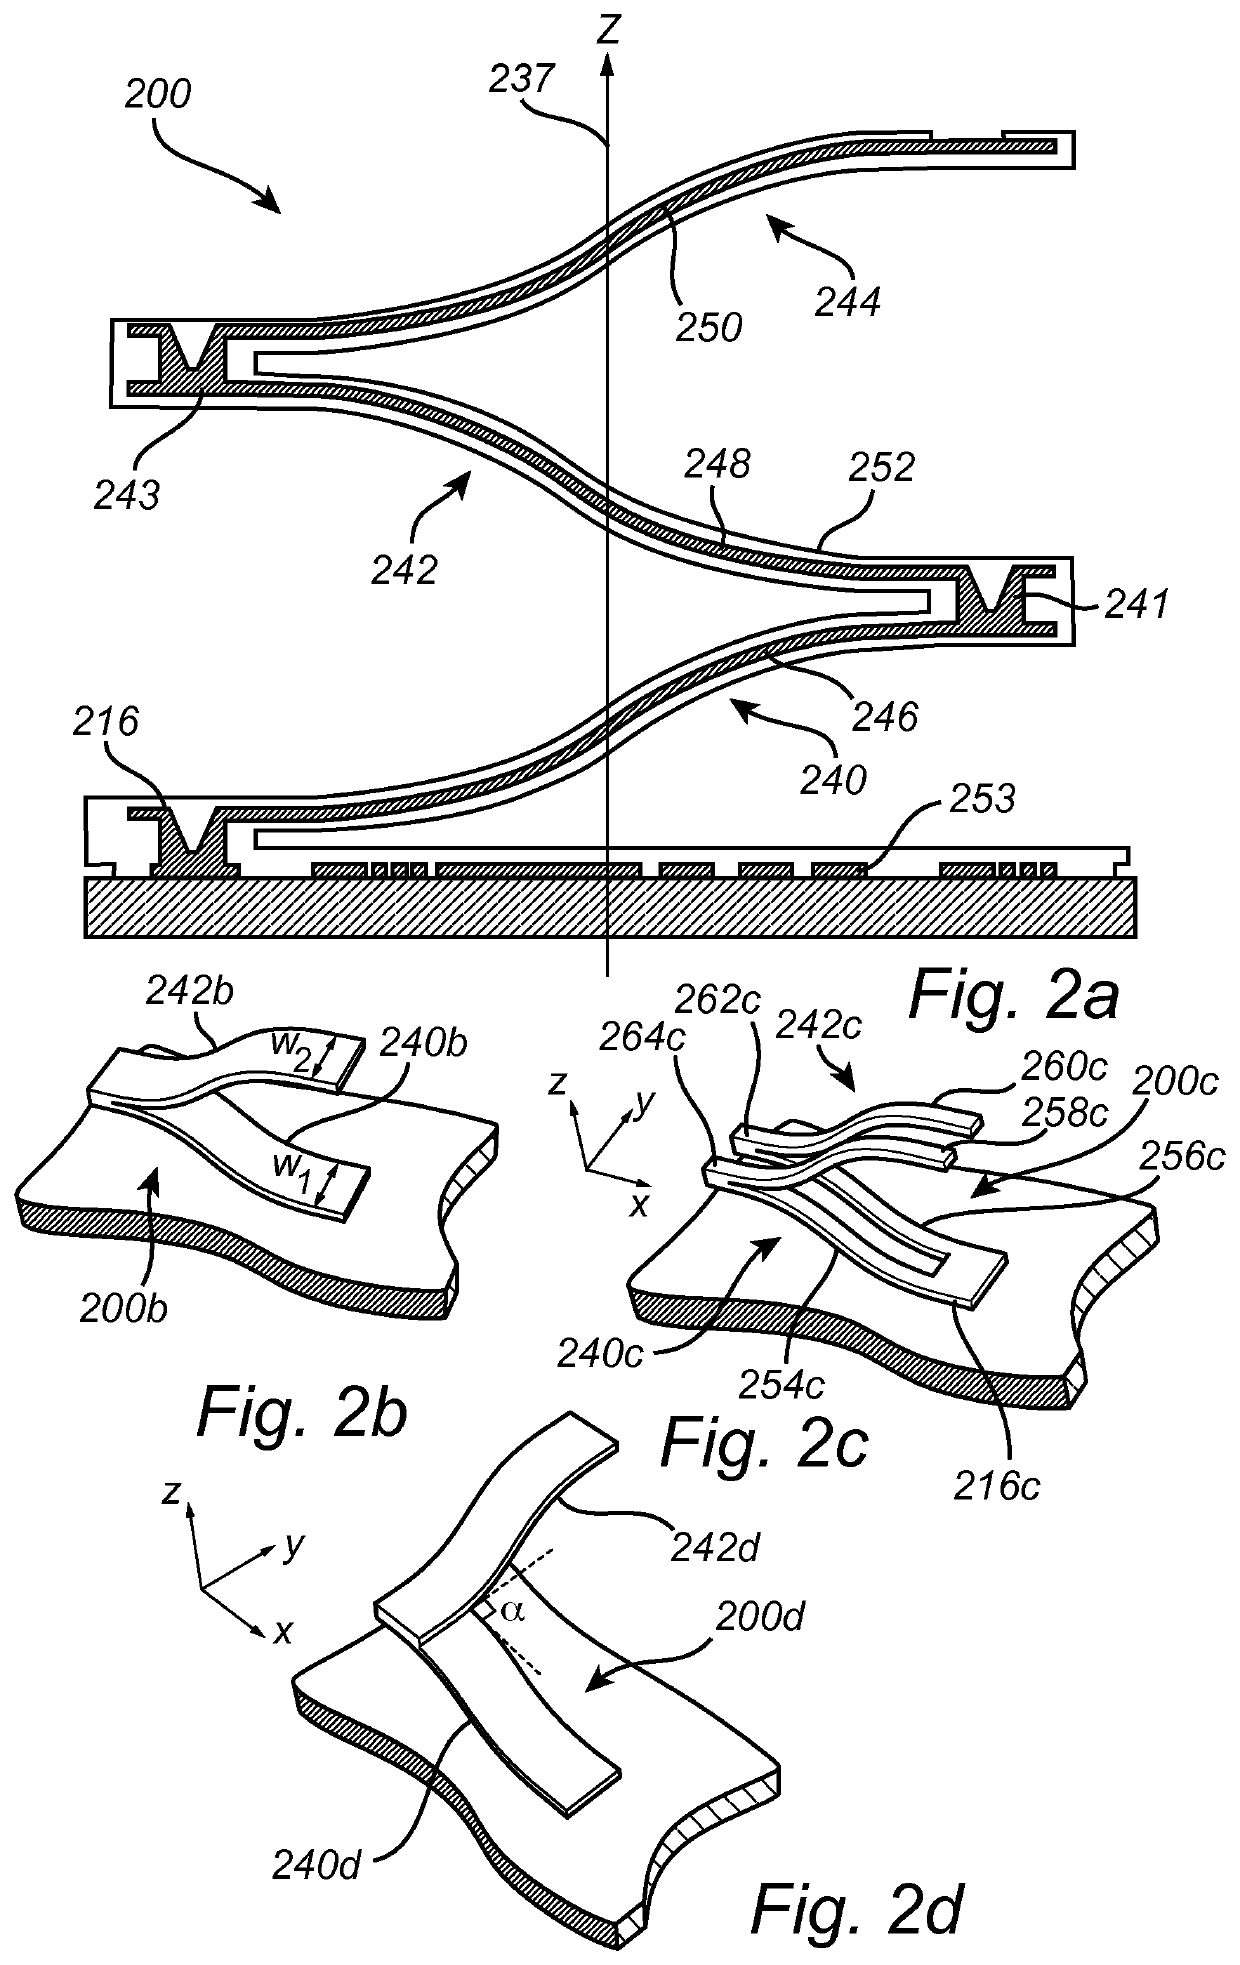 Unfoldable layered connection, and method for manufacturing an unfoldable layered connection